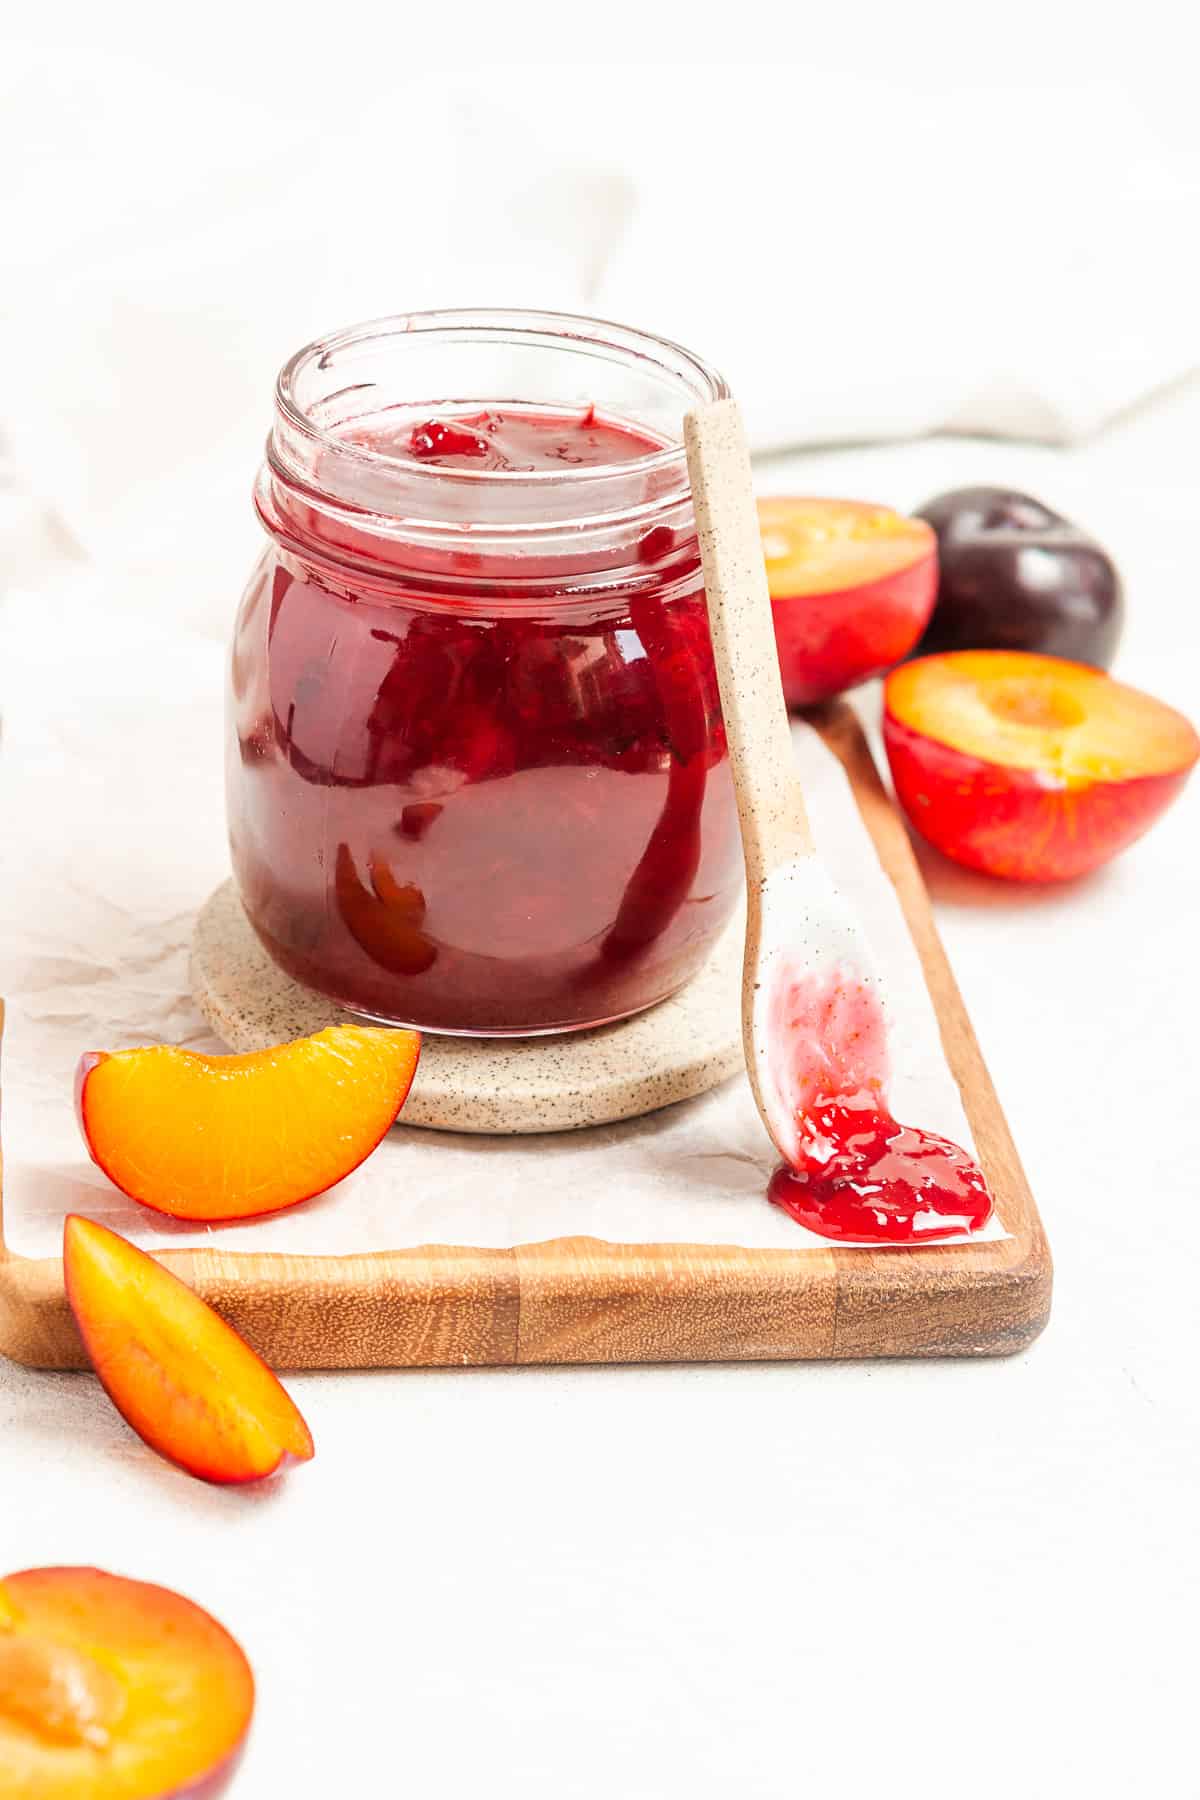 Jar of jam, sitting on a board, with a spoon and a dollop of jam on the edge and some pieces of plum around the edge.